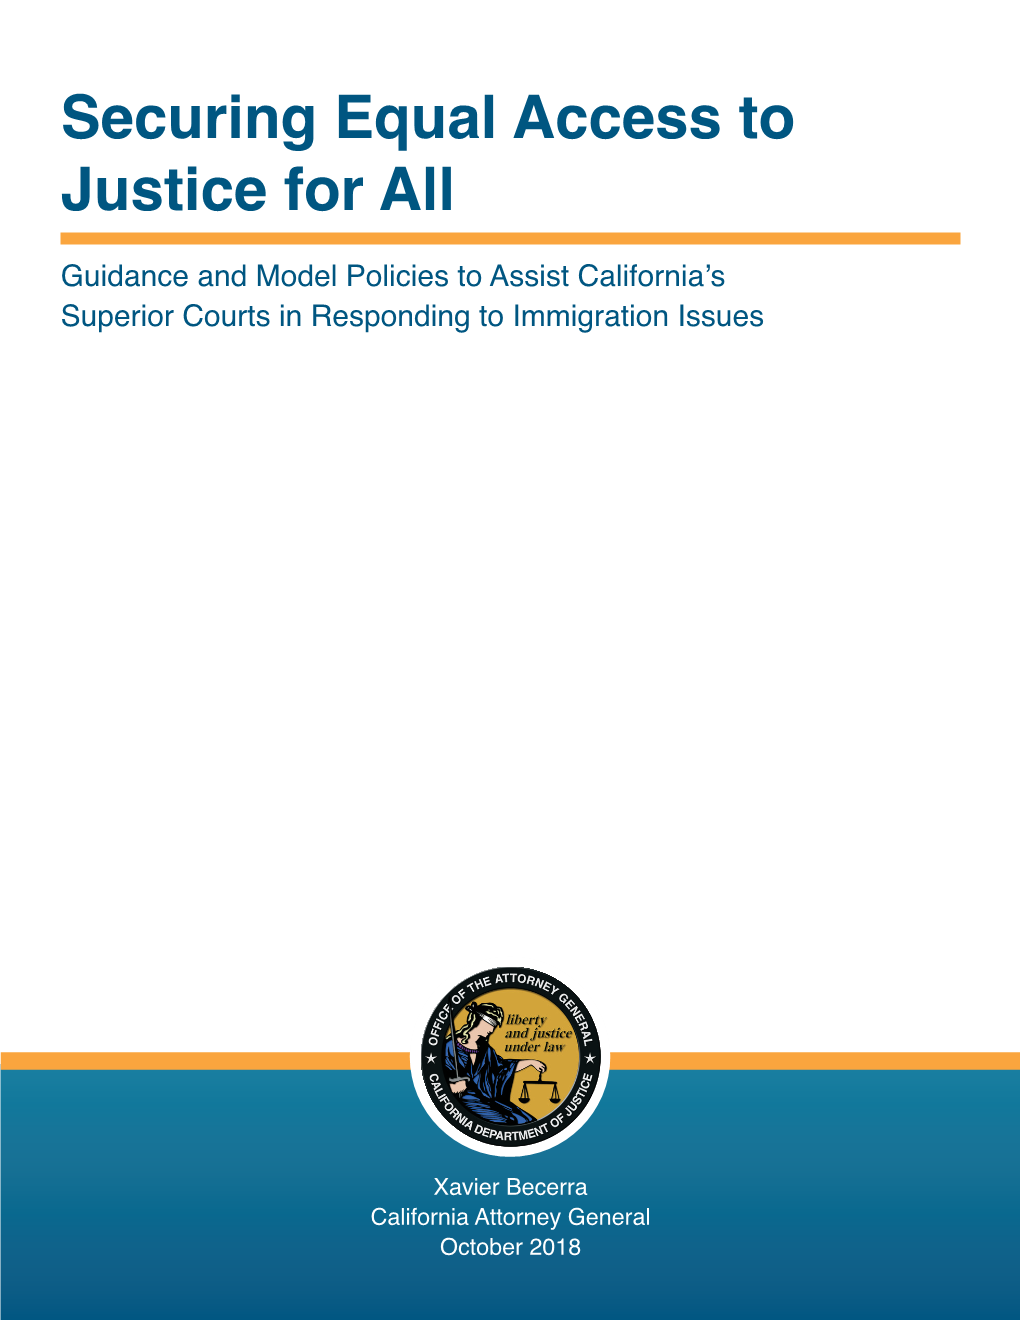 Guidance and Model Policies to Assist California’S Superior Courts in Responding to Immigration Issues